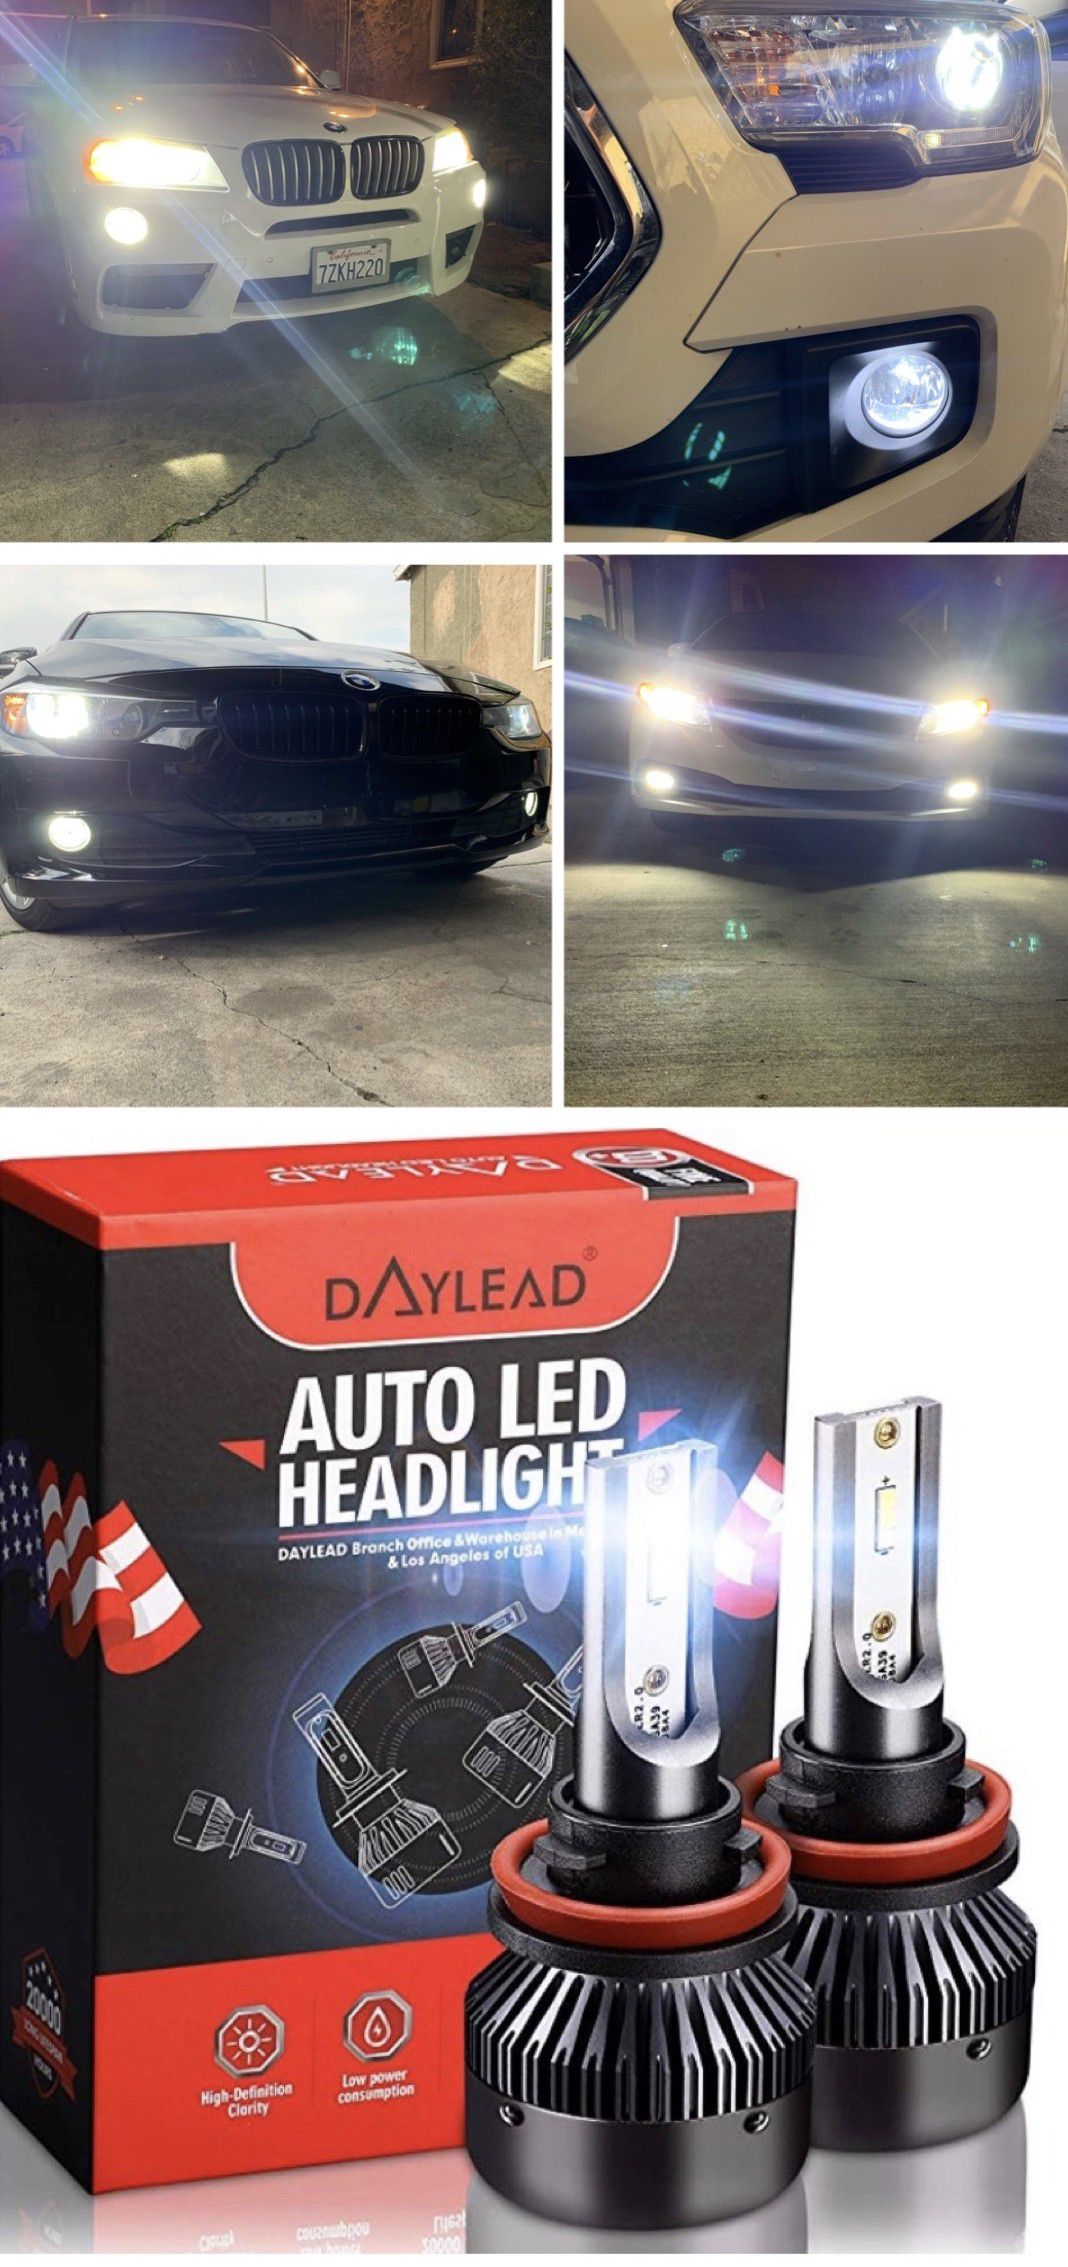 Led headlights or foglights 25$ free license plate LEDs with purchase